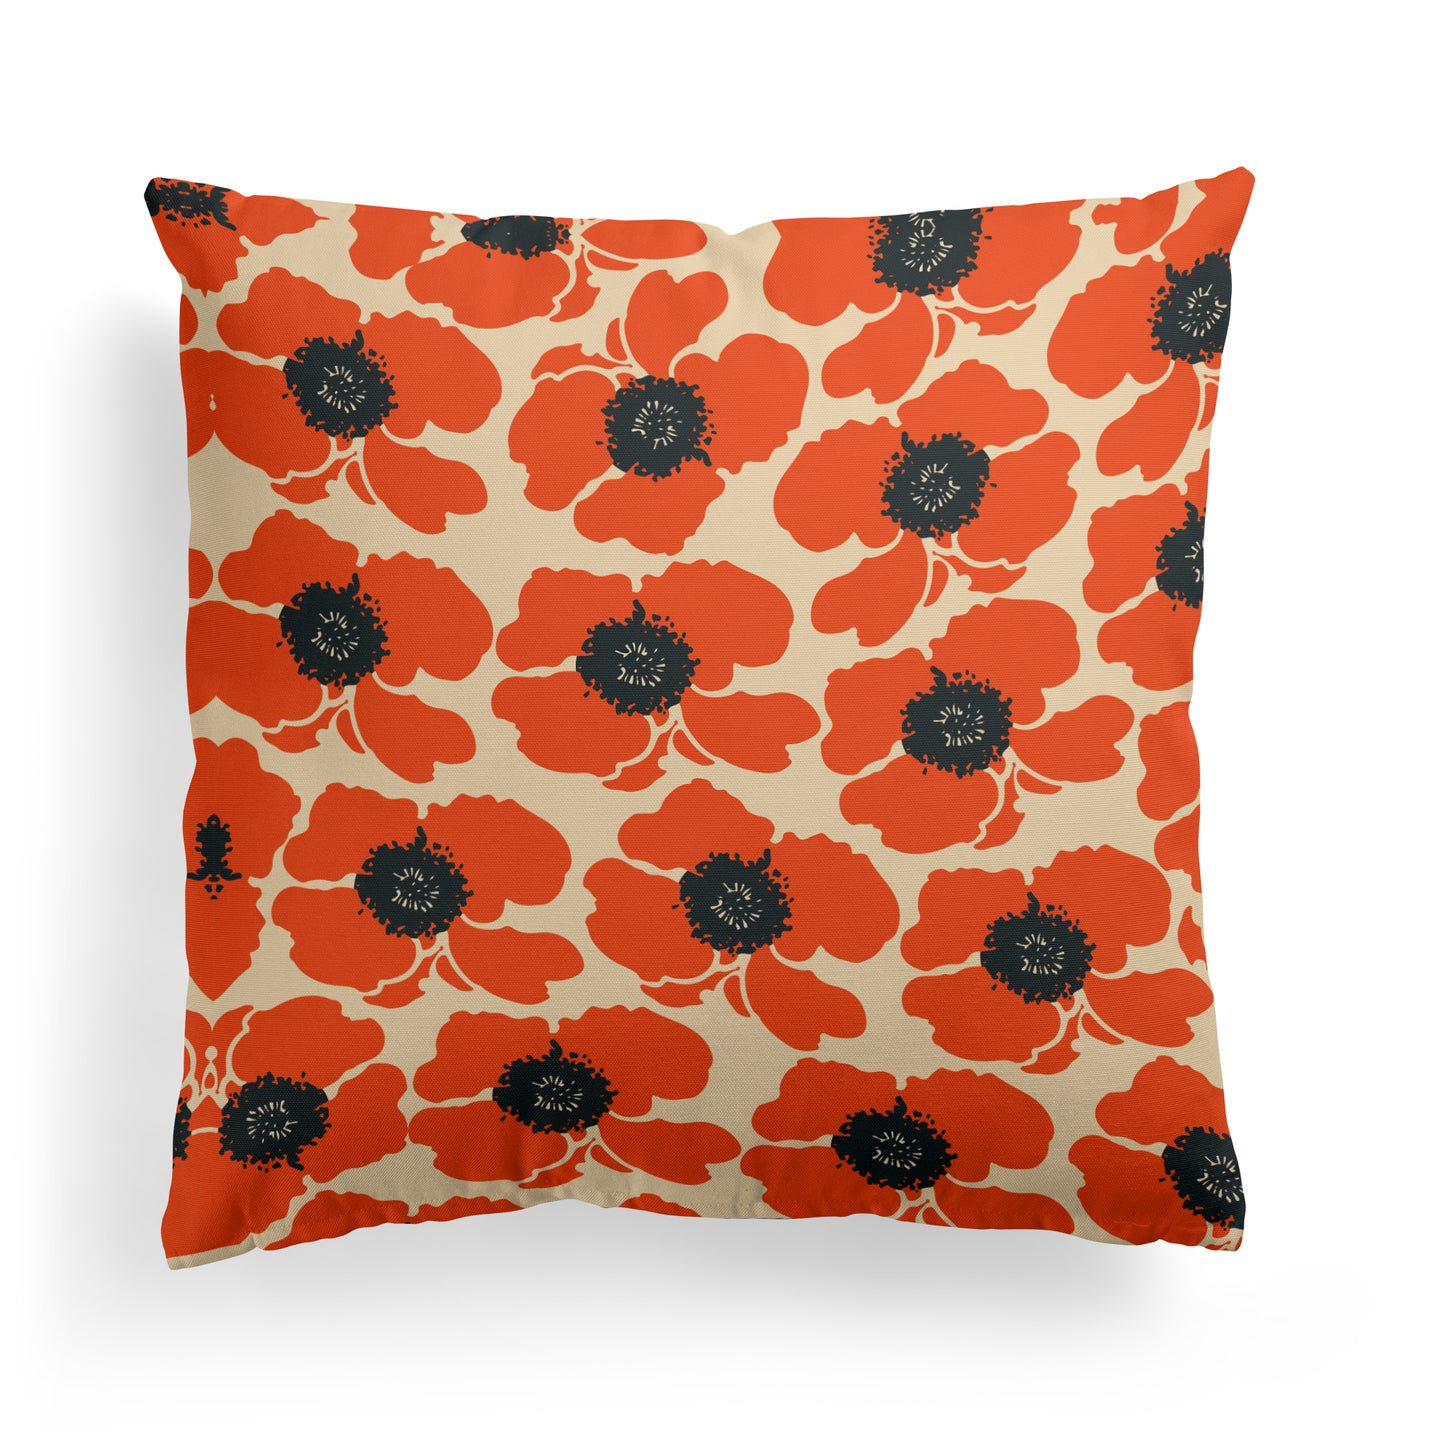 Pillow with Poppies